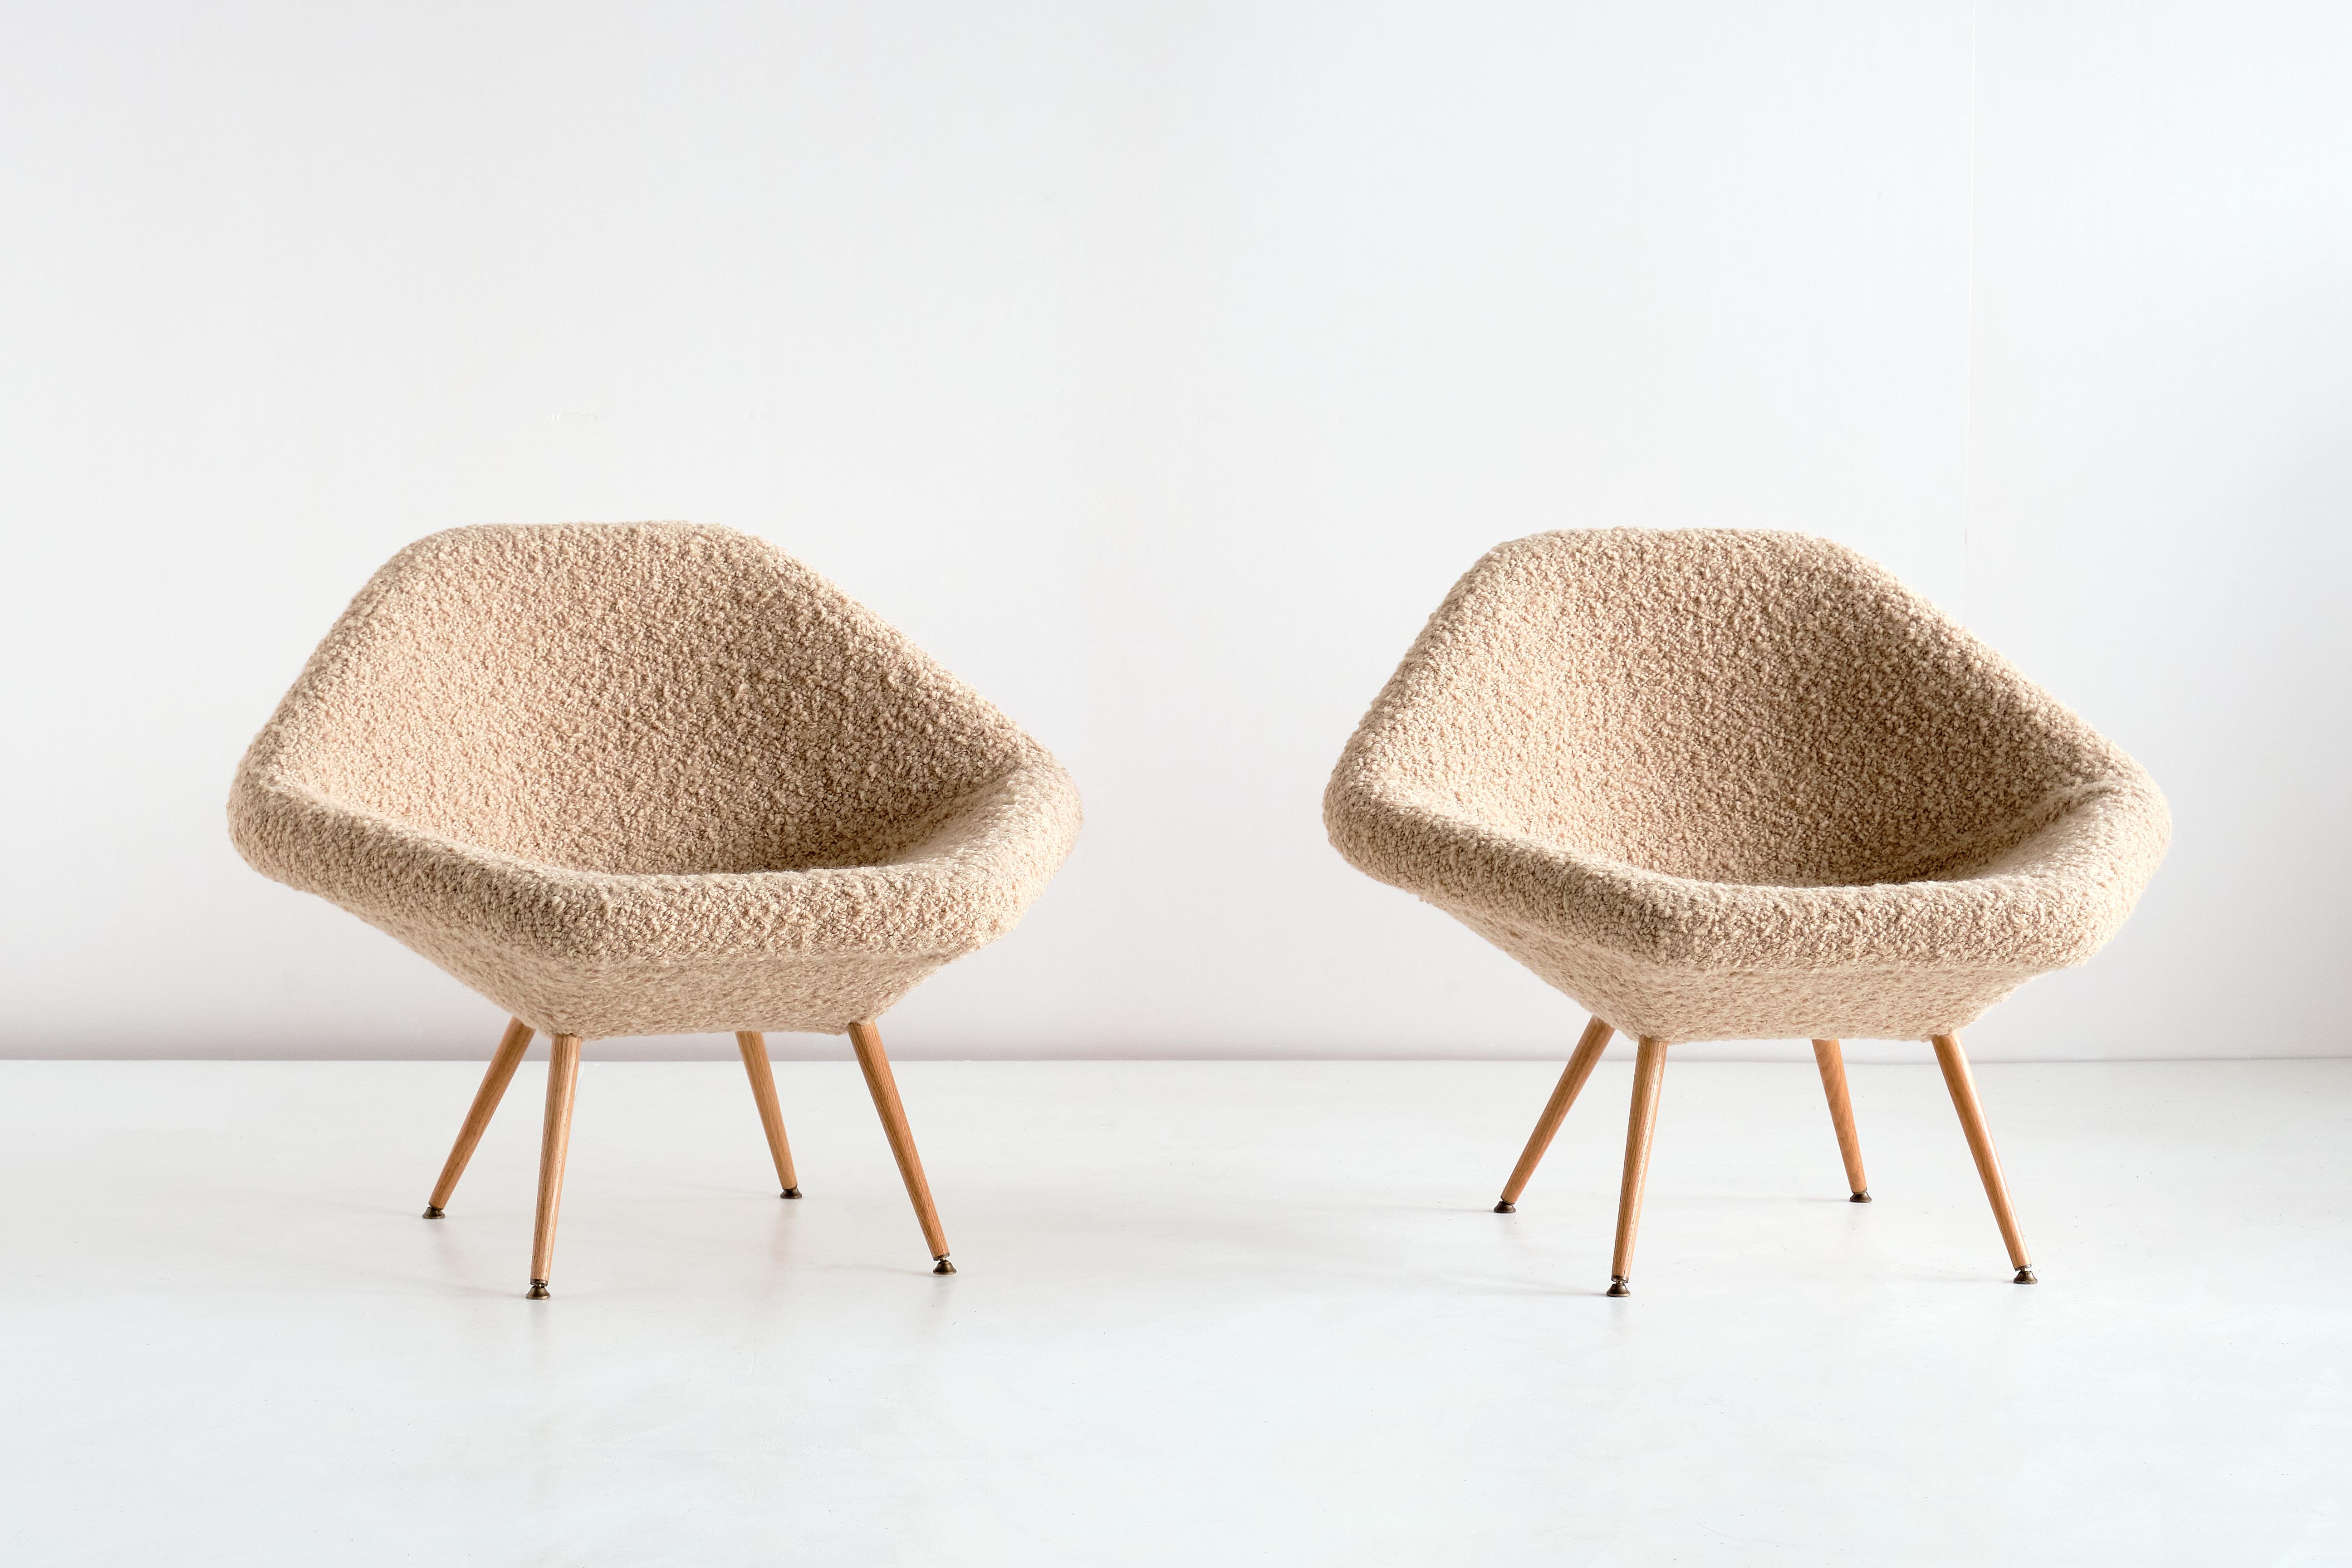 This rare pair of lounge chairs was designed by Arne Dahlén in the early 1960s. The model was called 'Eva' and was manufactured by his company, Dahléns Company in the Swedish town Dalum. The company was solely devoted to the production of